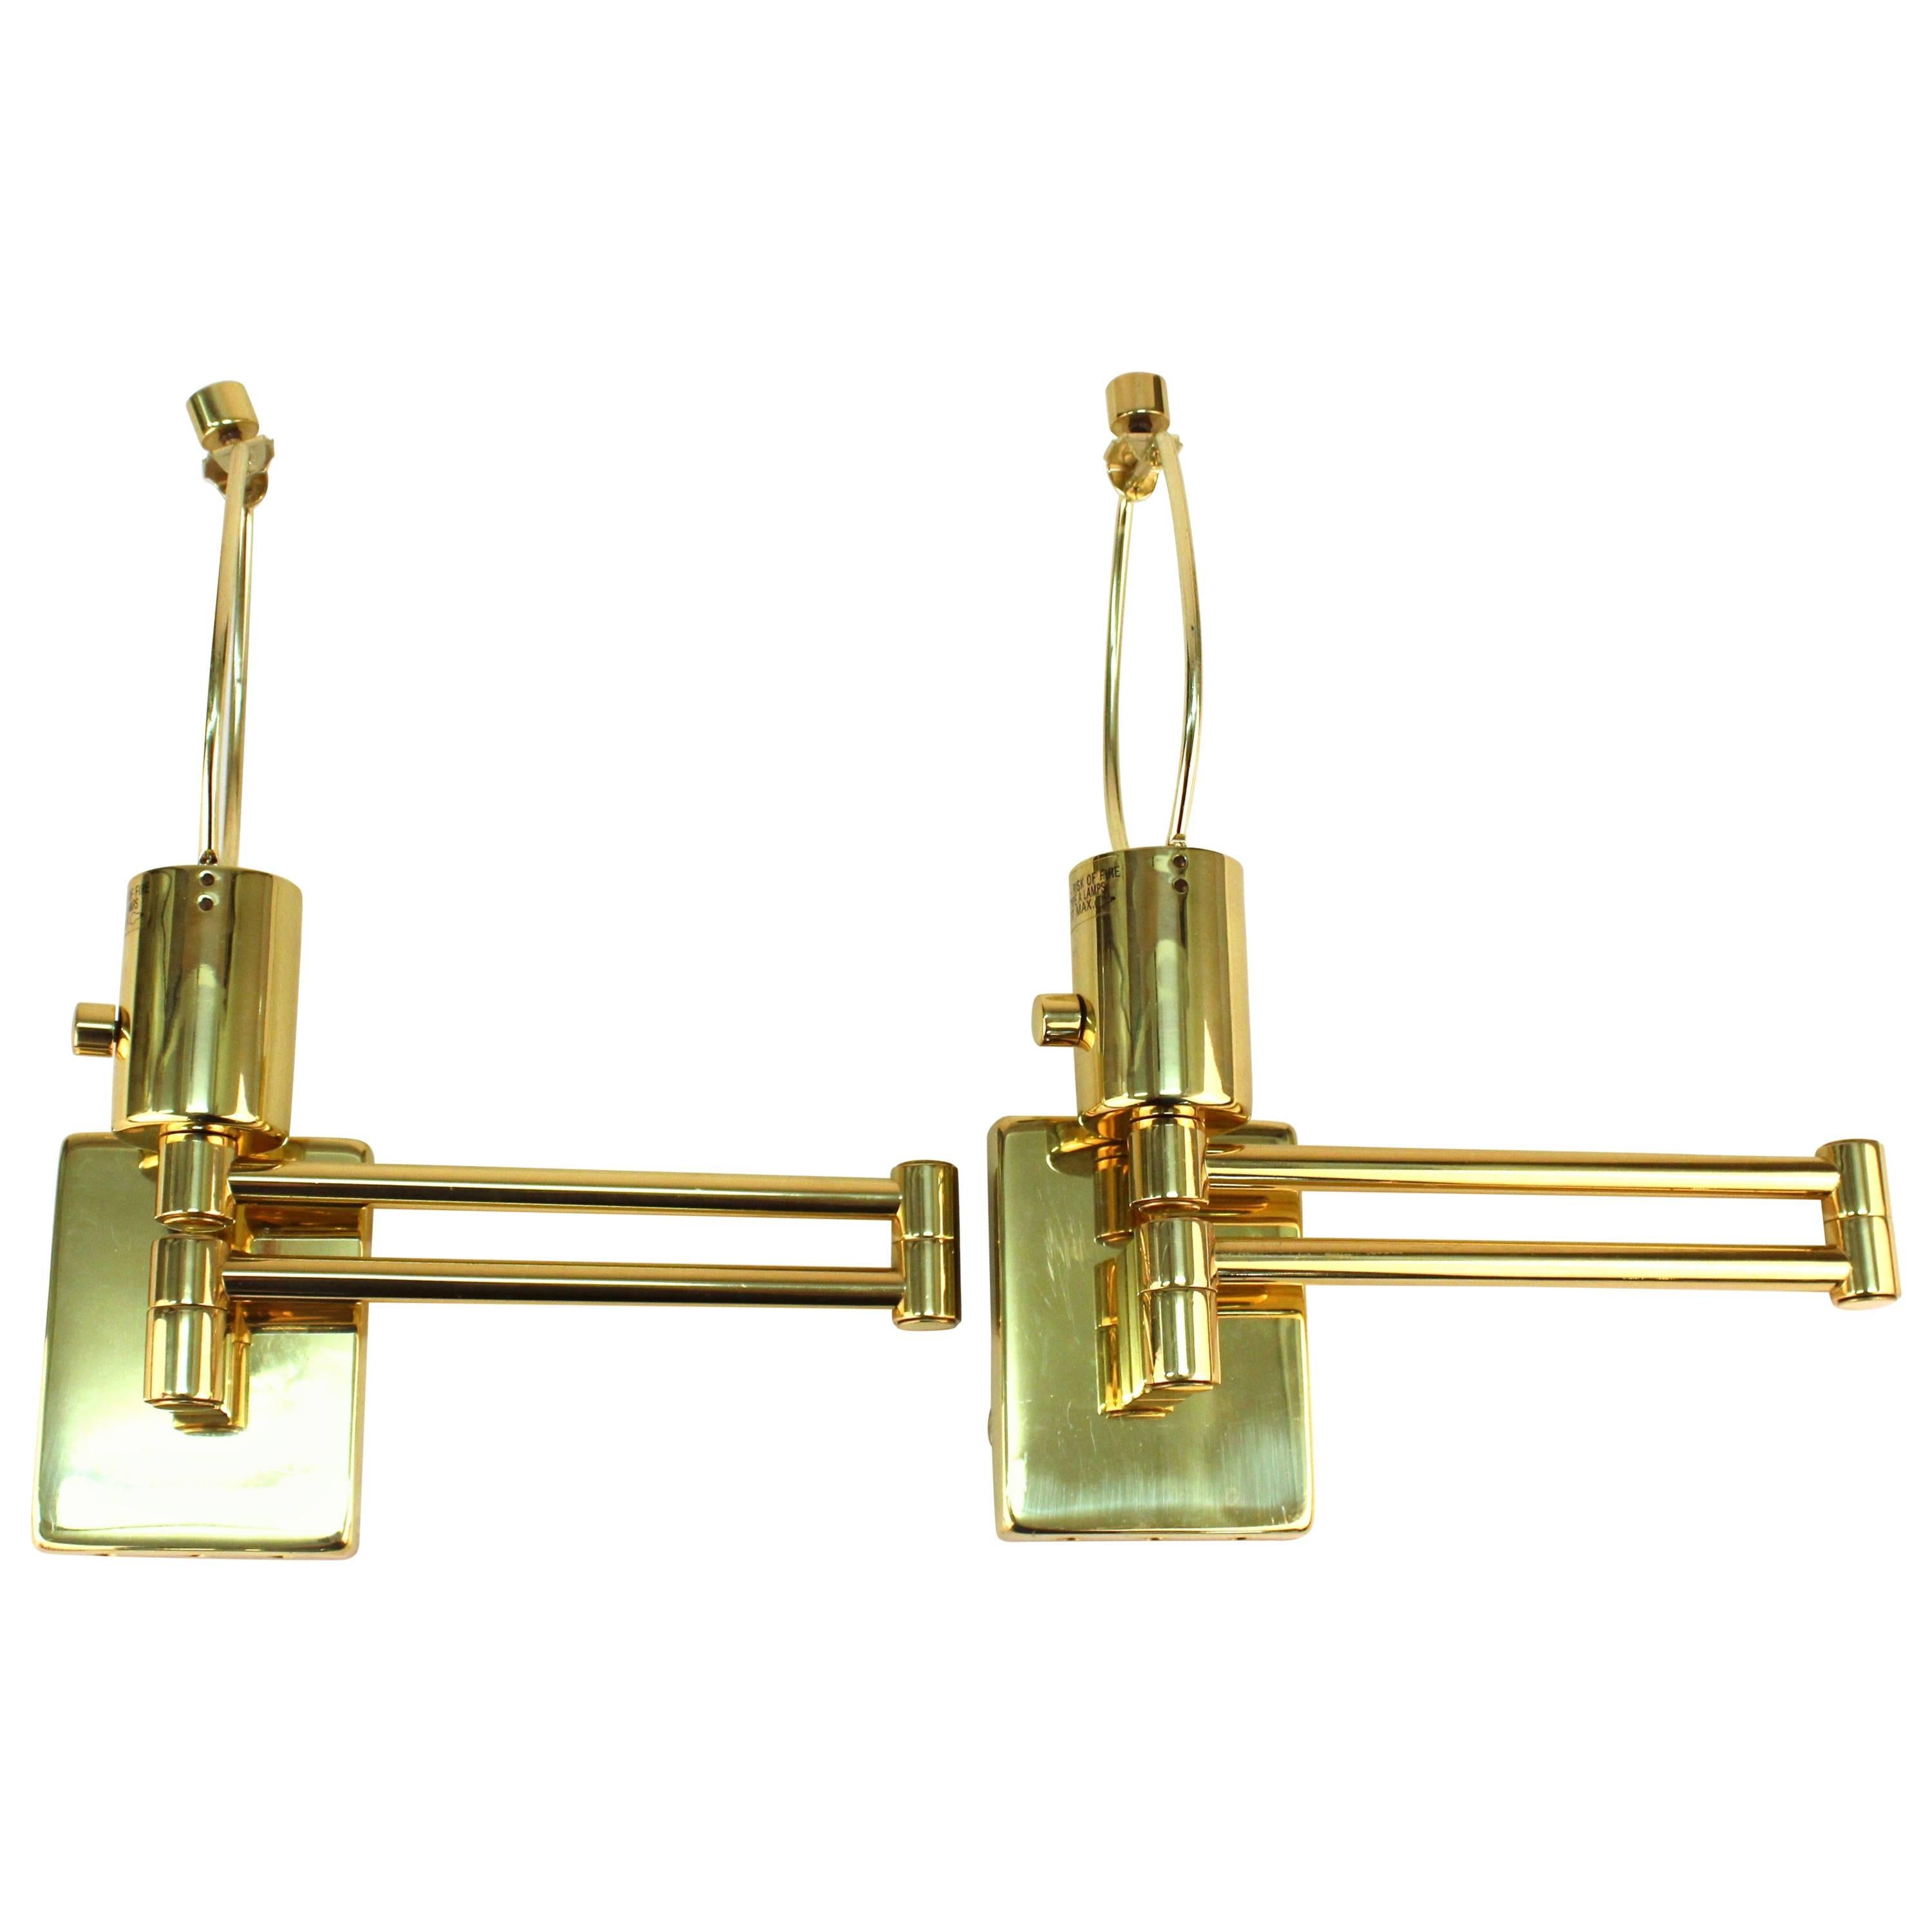 Hinson Swing Arm Wall Sconces by Metalarte in Polished Brass